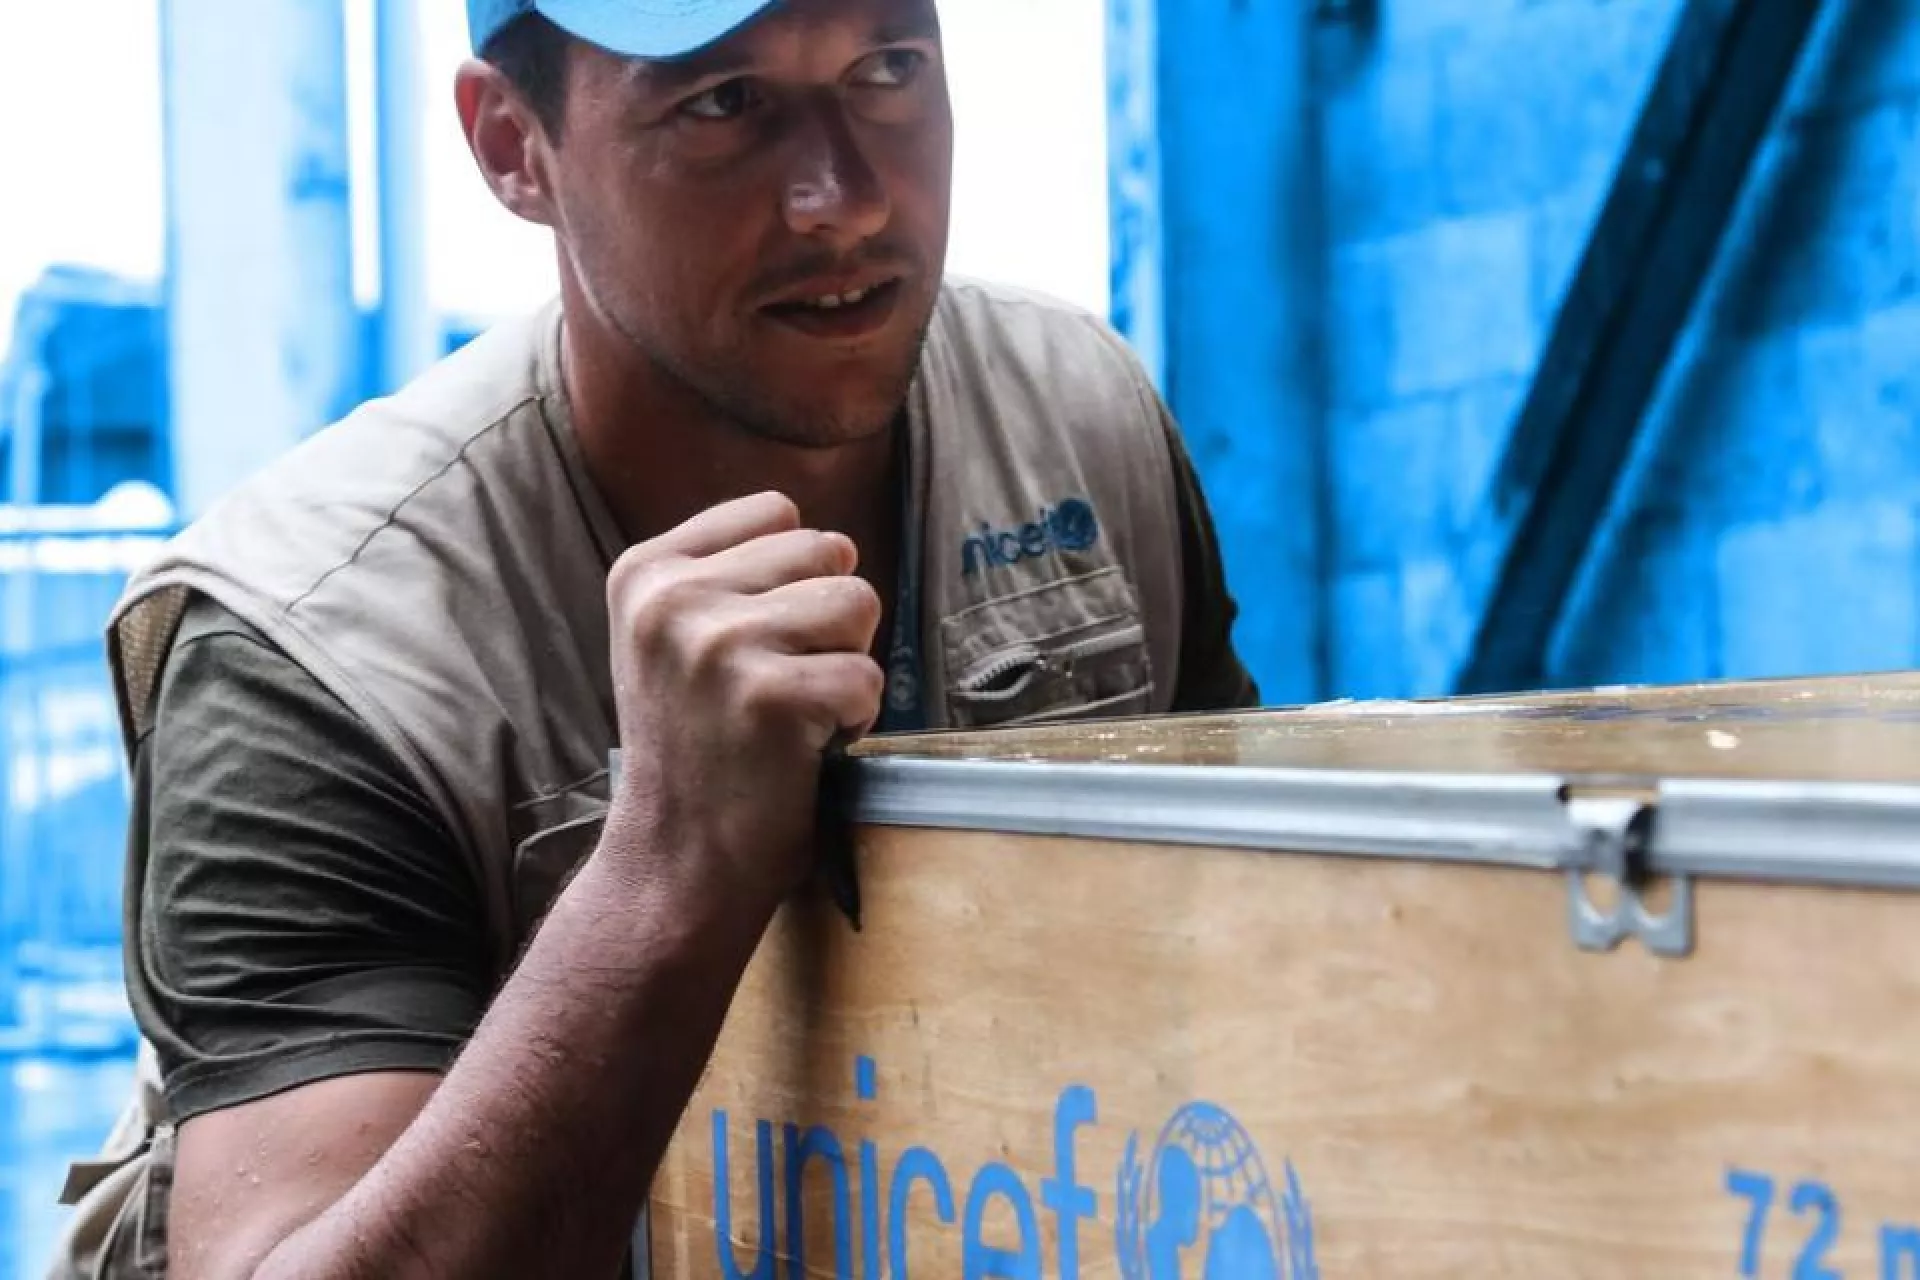 UNICEF delivers supplies